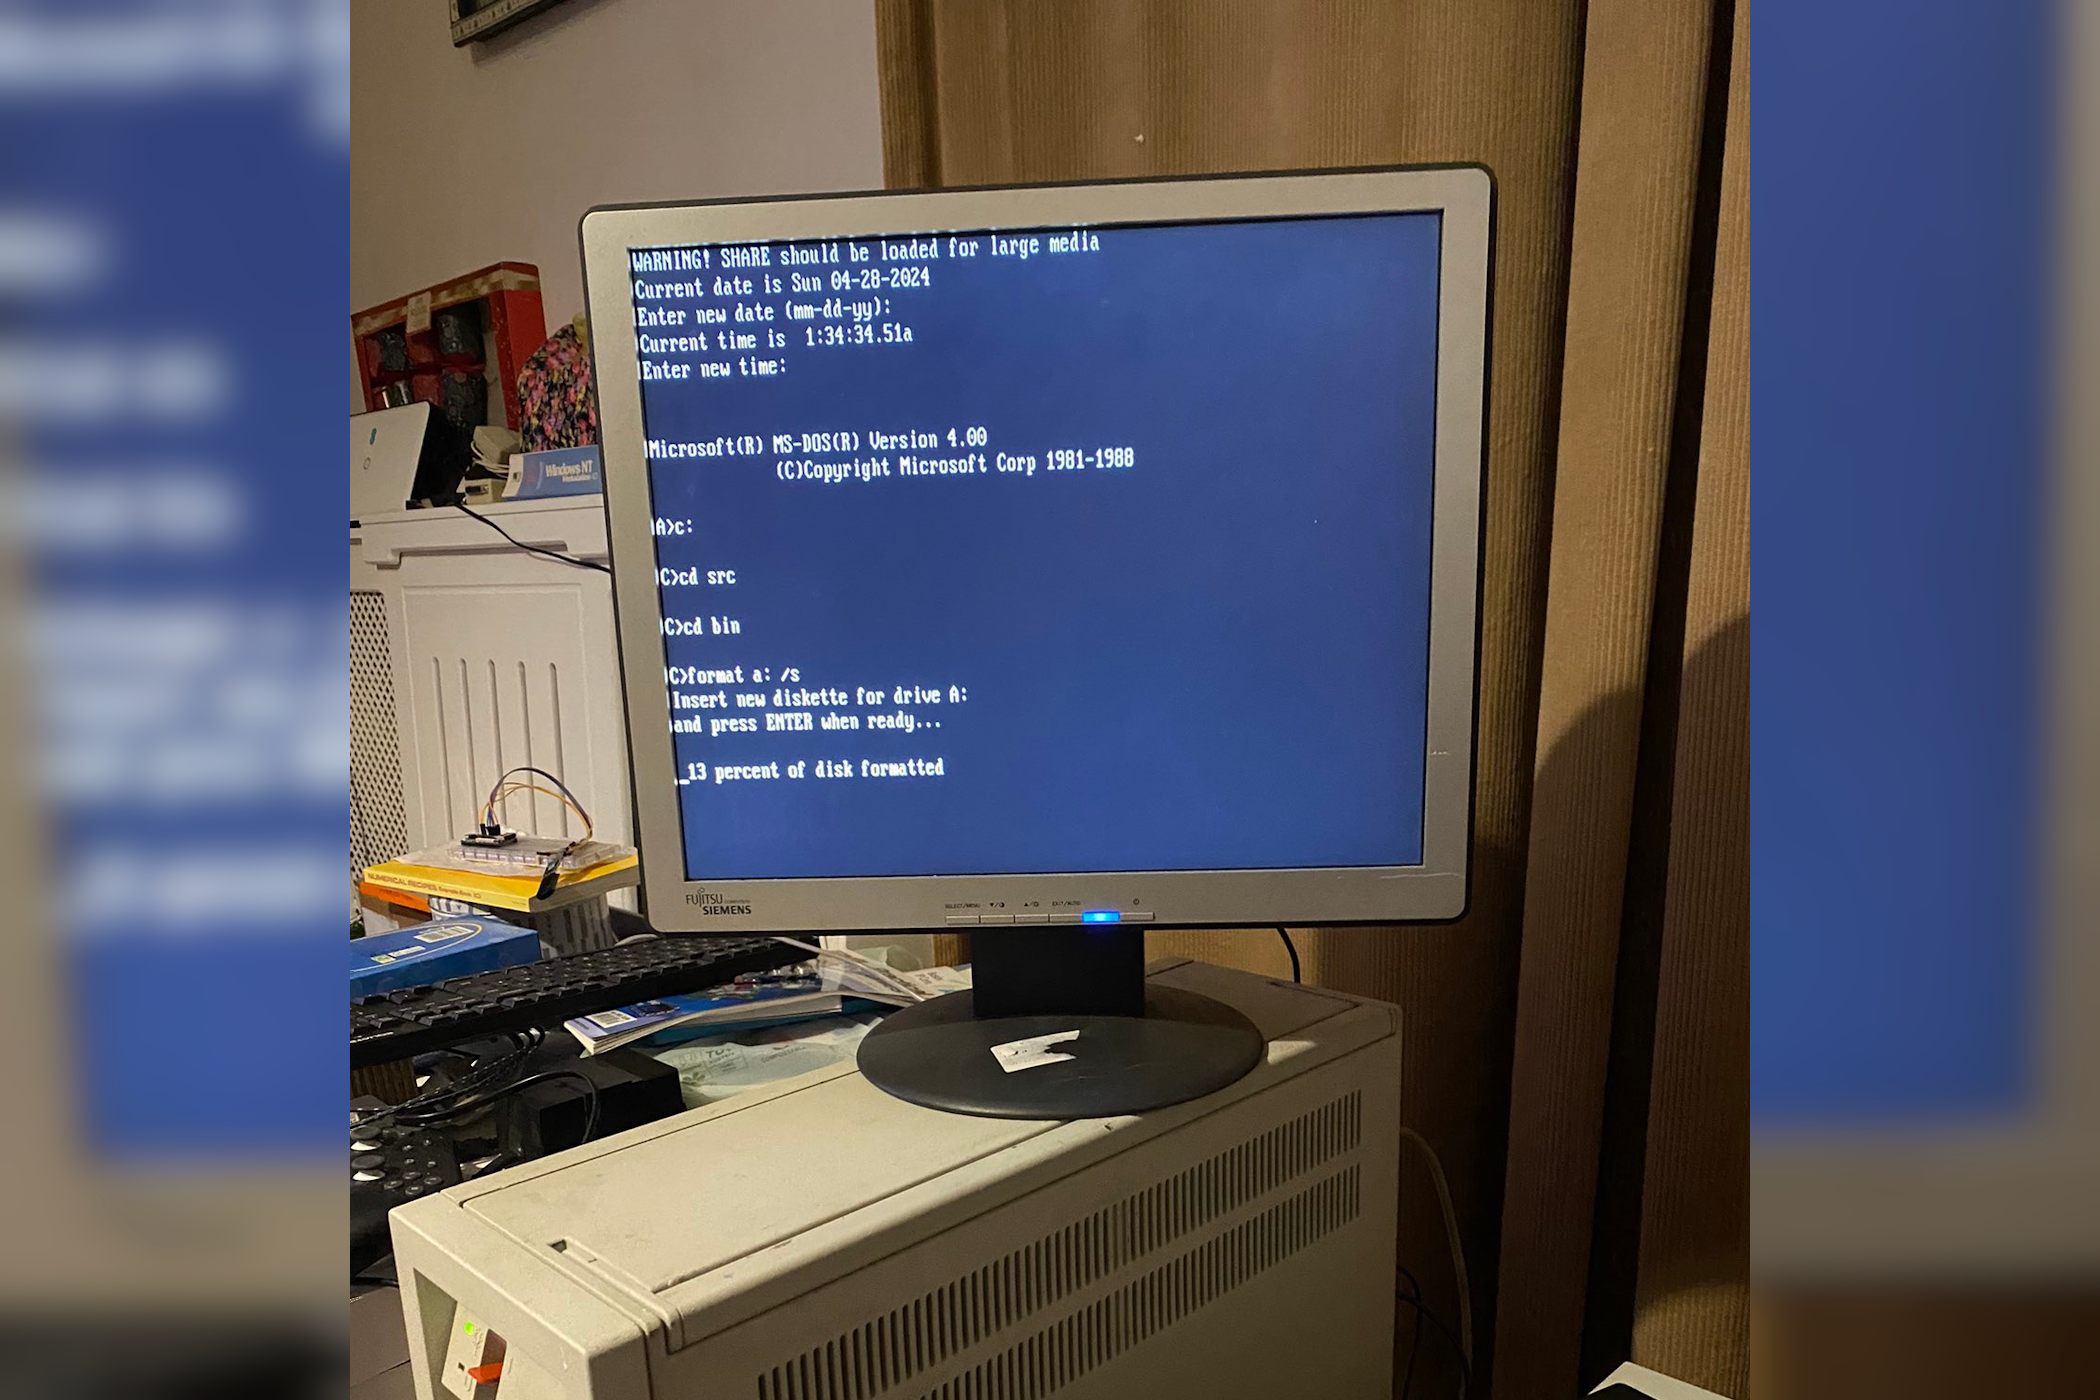 Someone built MS-DOS 4 on their PS/2, because old habits die hard